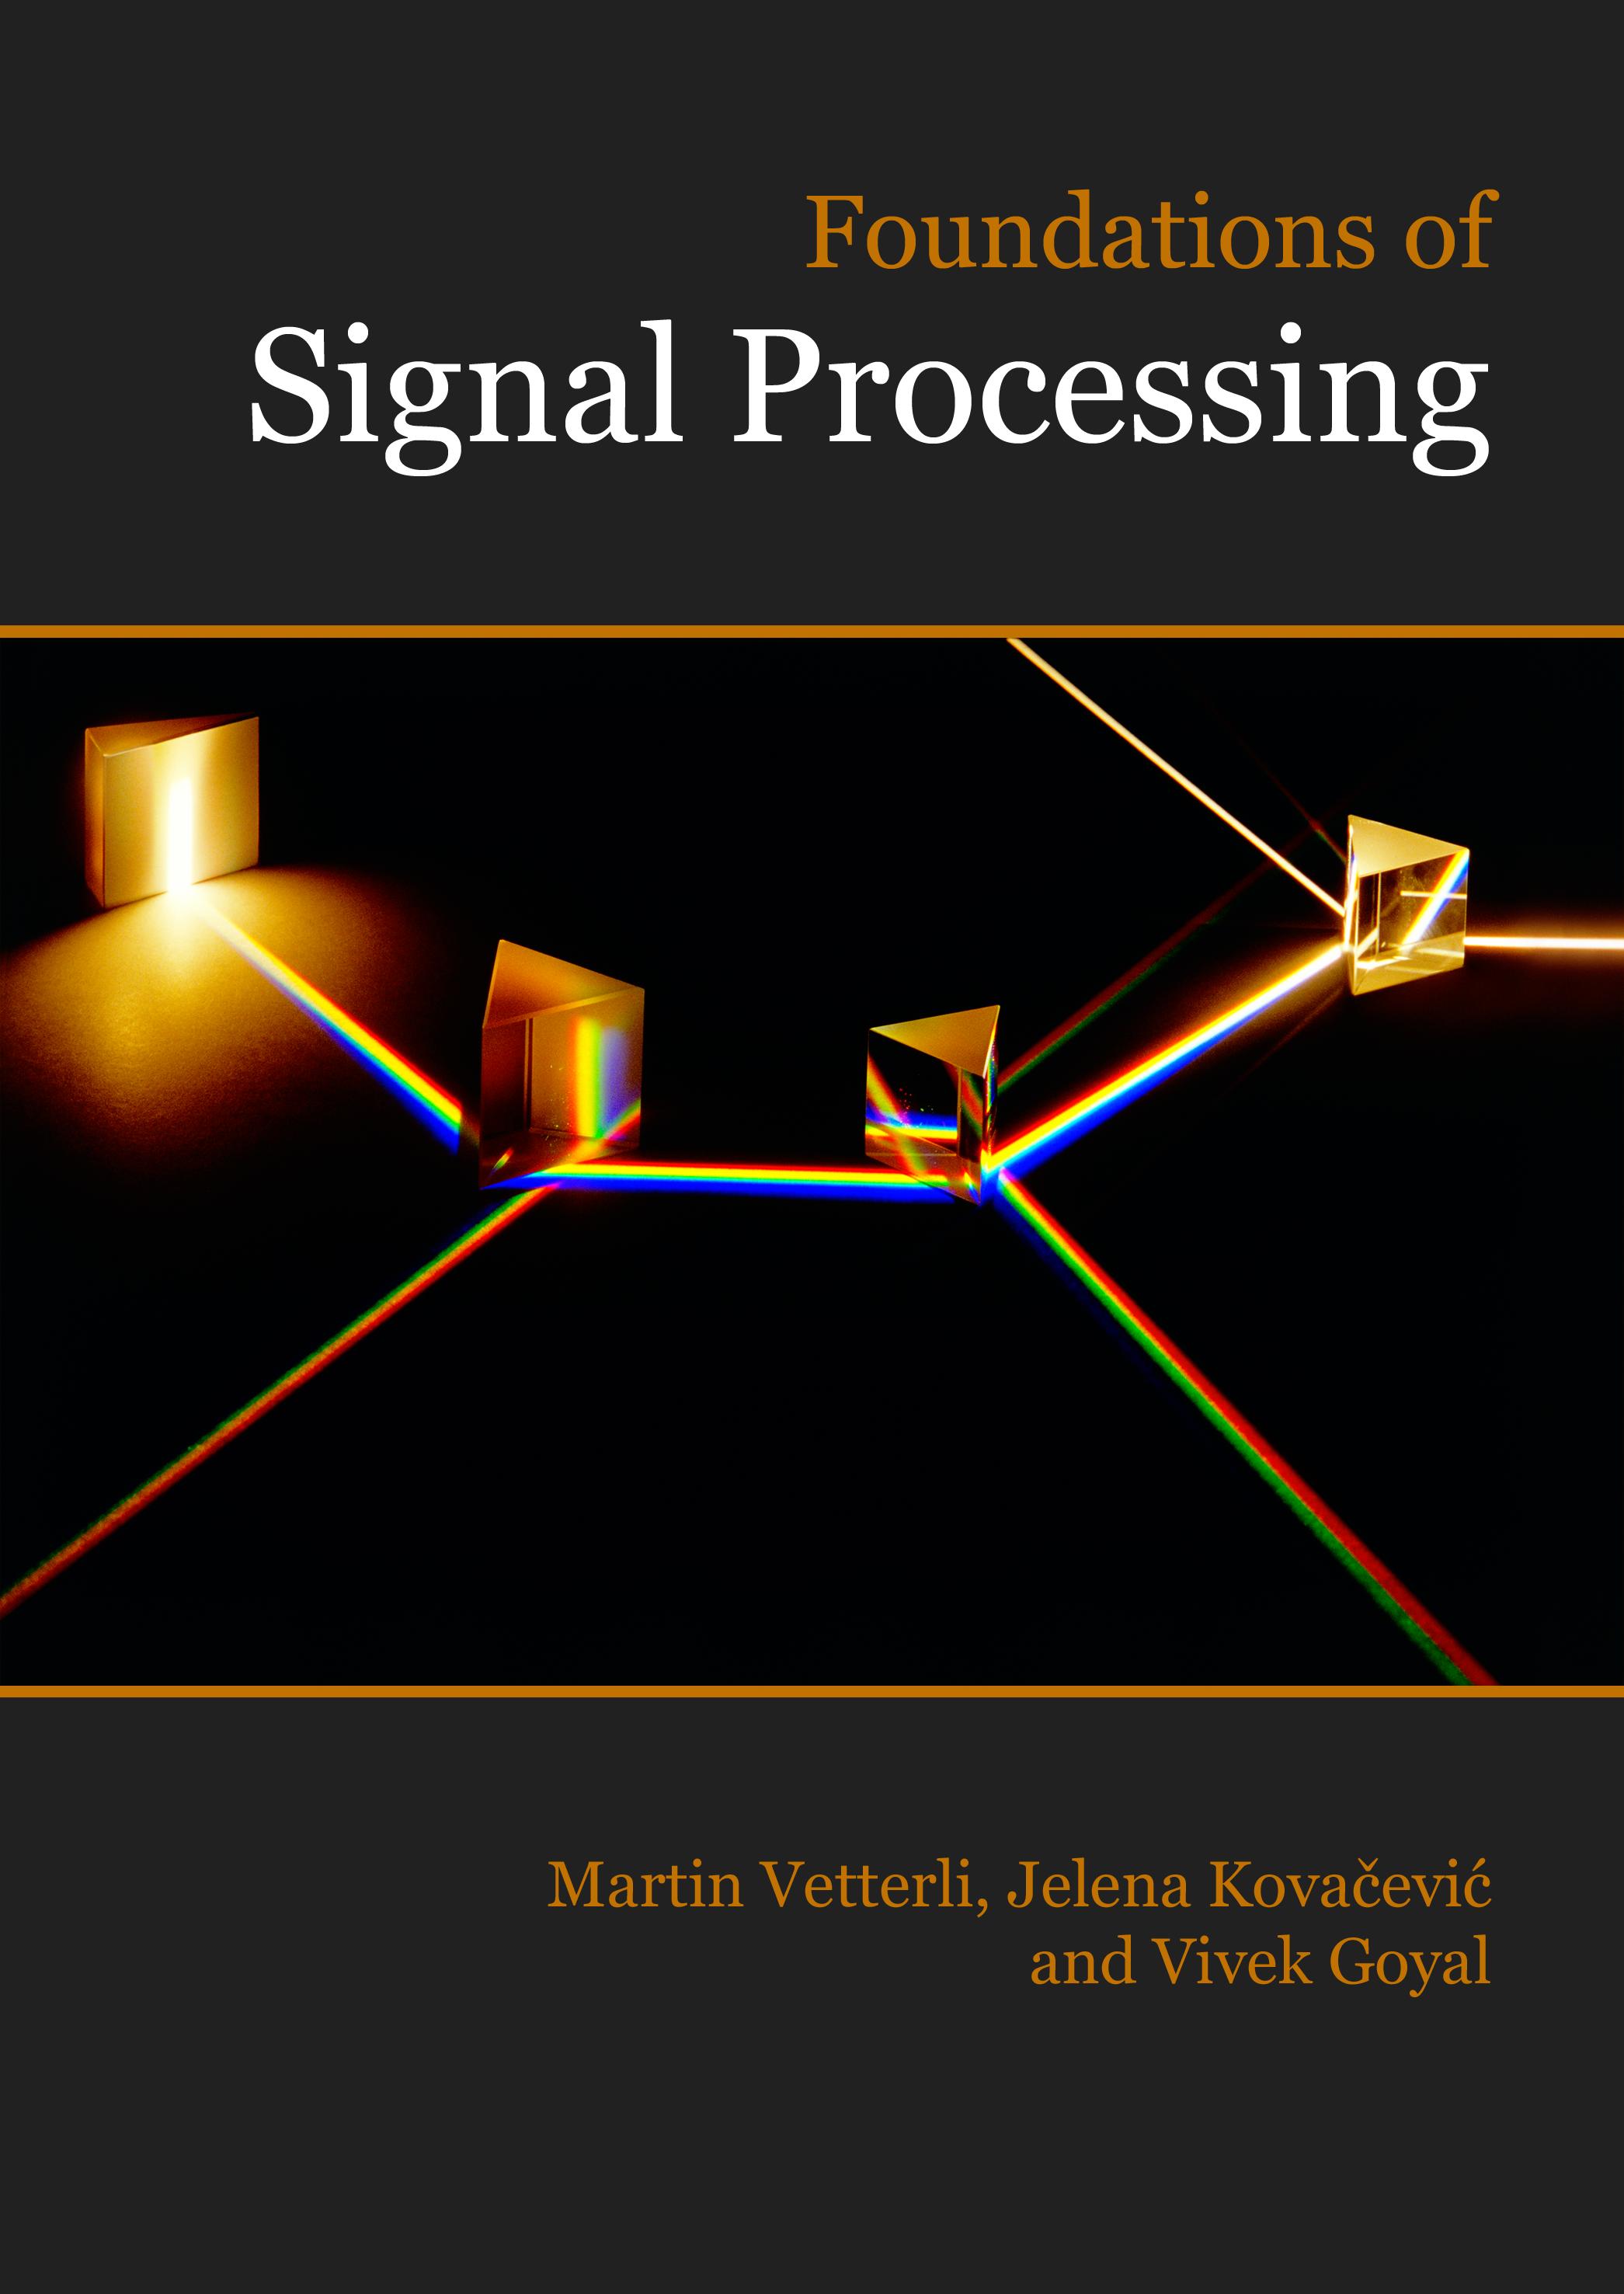 Foundations of Signal Processing